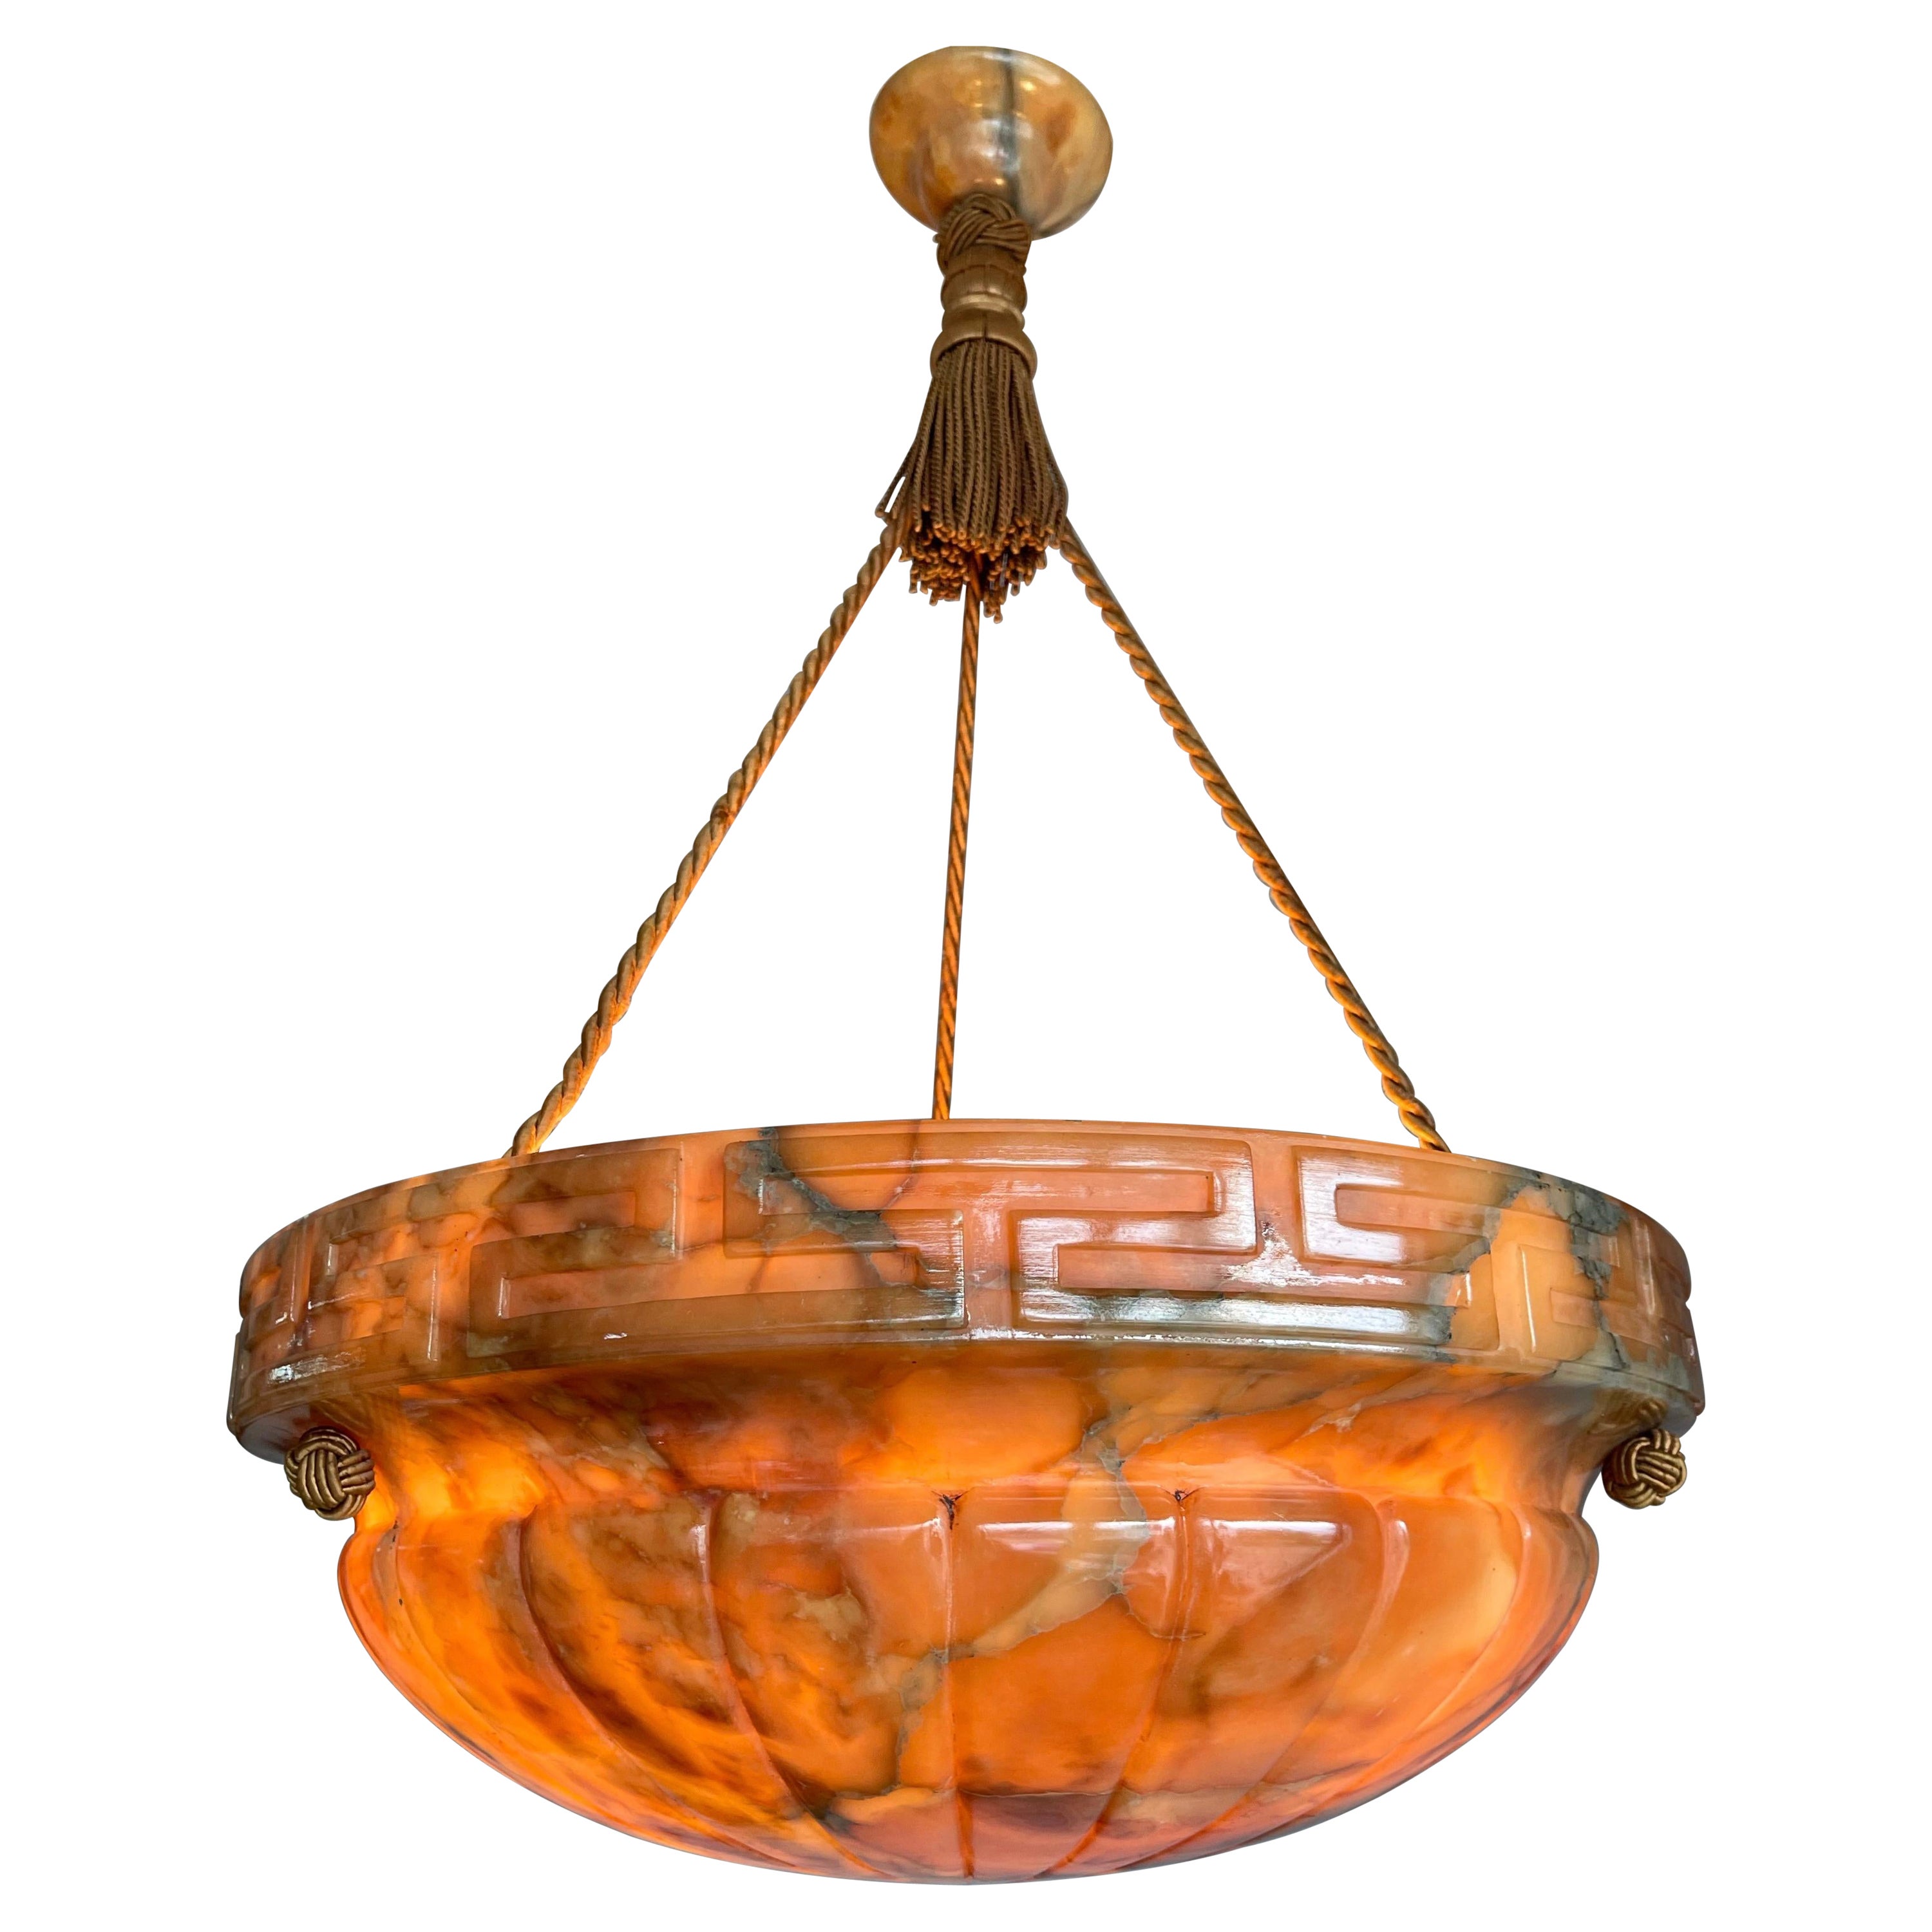 Beautiful design and wonderful light creating, mother nature mineral stone shade plaffonier ceiling light.

This marvelous and top quality carved, early 20th century alabaster pendant is hanging from the original alabaster canopy and perfectly